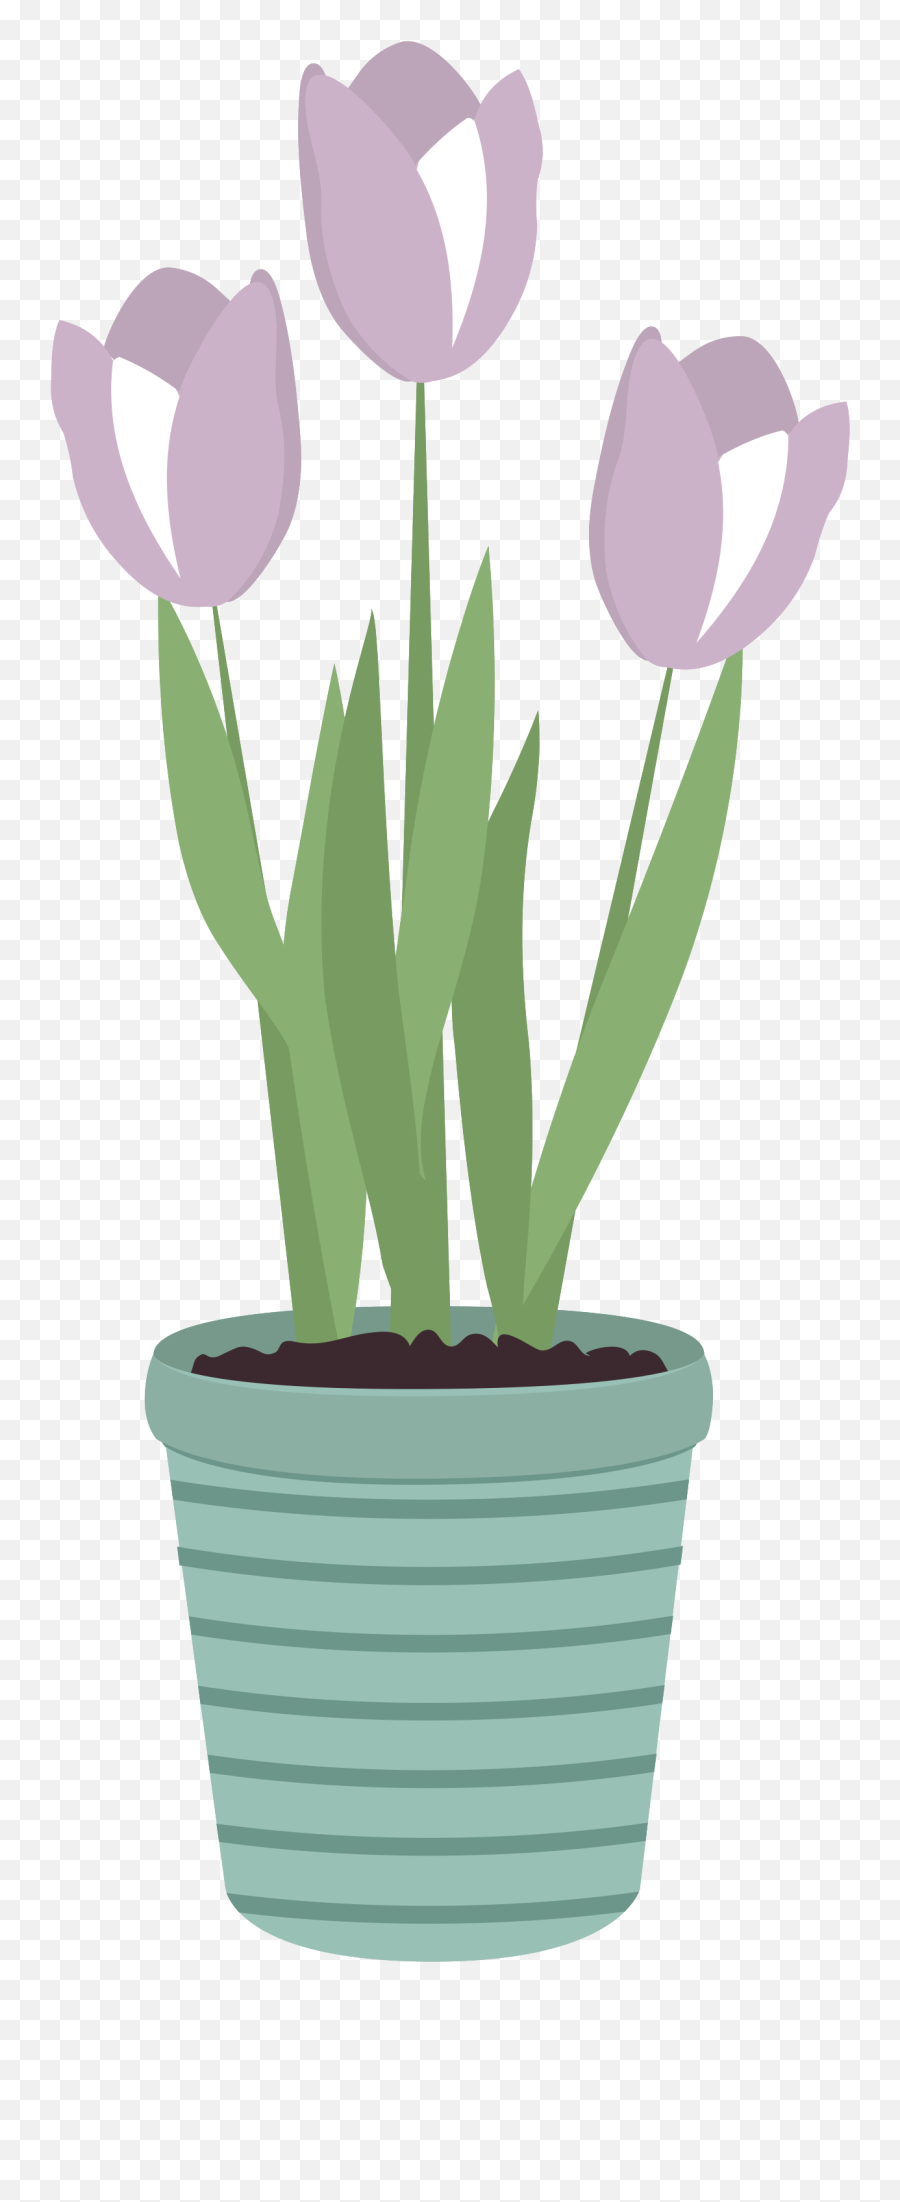 Free Flower Pot Png With Transparent Background - Flowerpot,Tulips Transparent Background